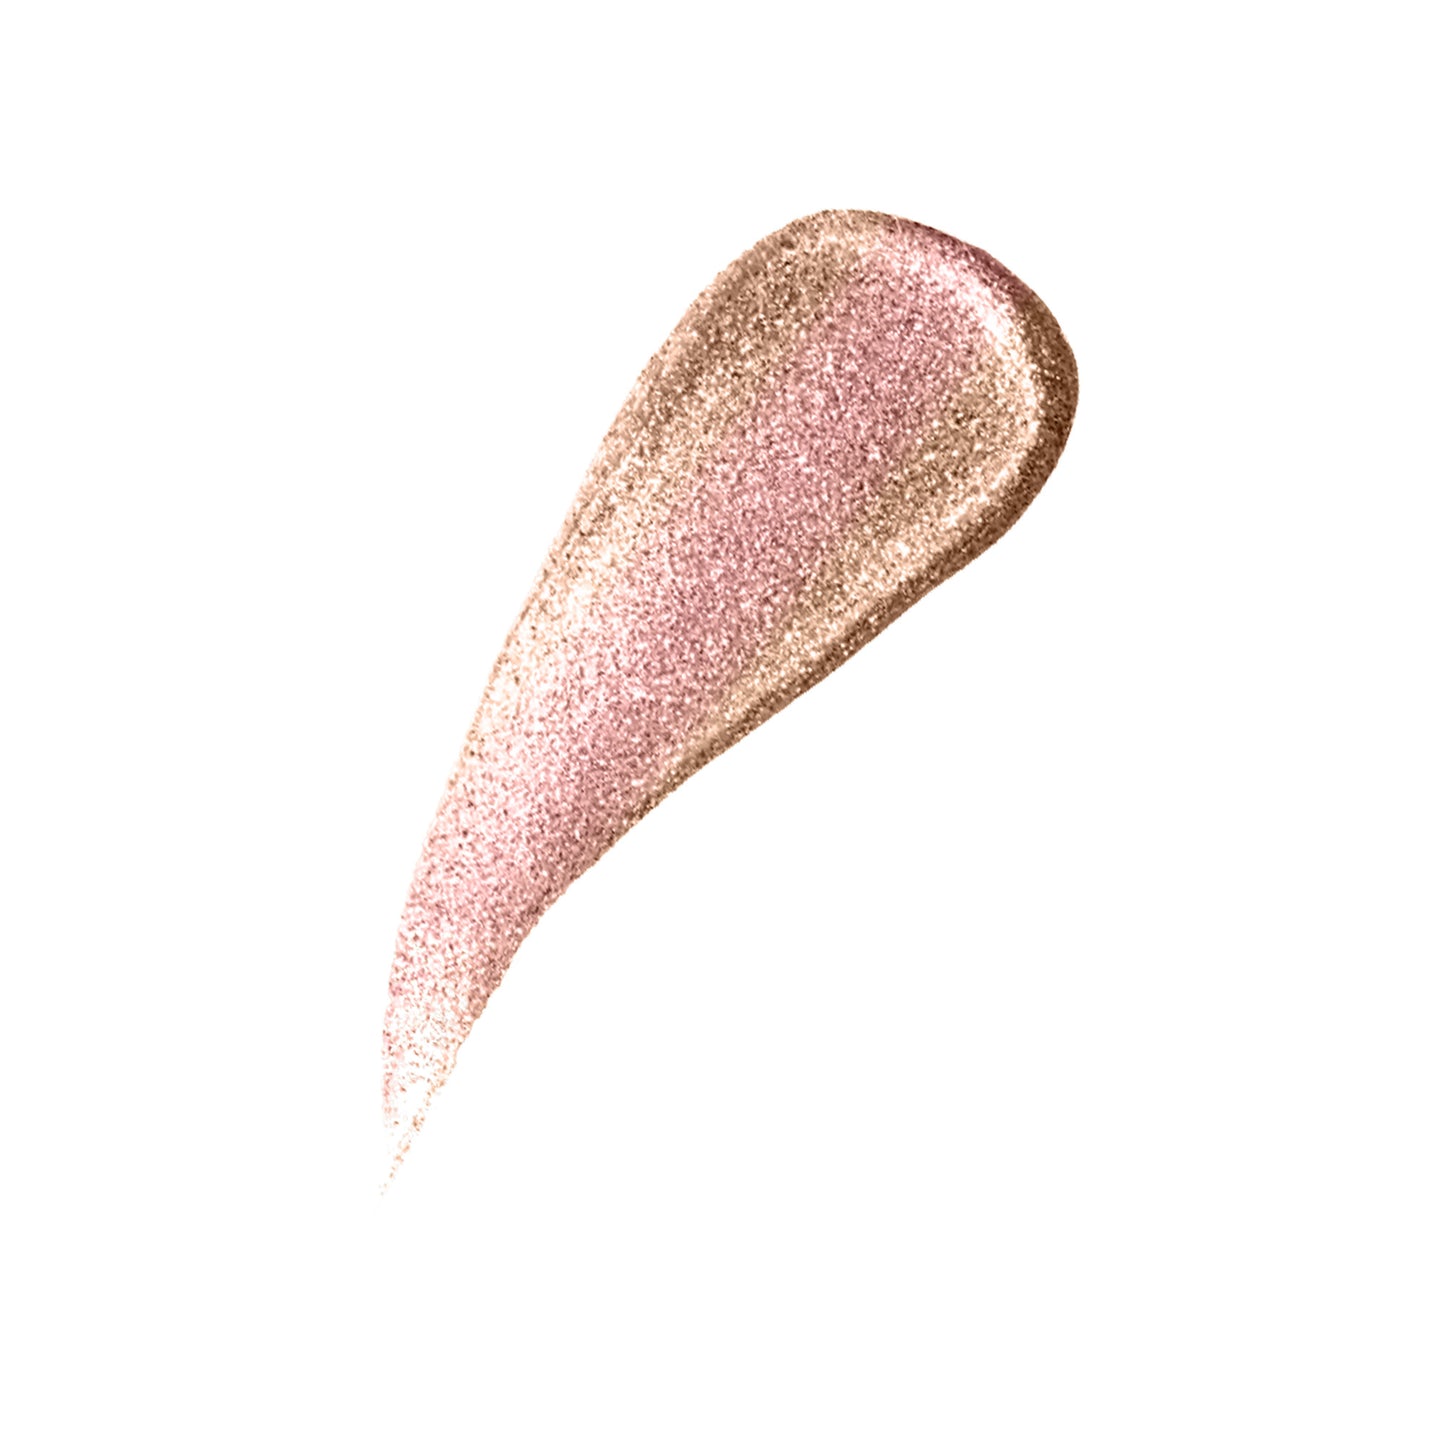 Achieve high-impact shine with Cruisin Organics Euphoria Liquid Shimmer. Versatile and crease-proof, add dazzling shine to your lips, eyelids, and cheekbones. Mix with other products or use alone for a must-have addition to your makeup routine.